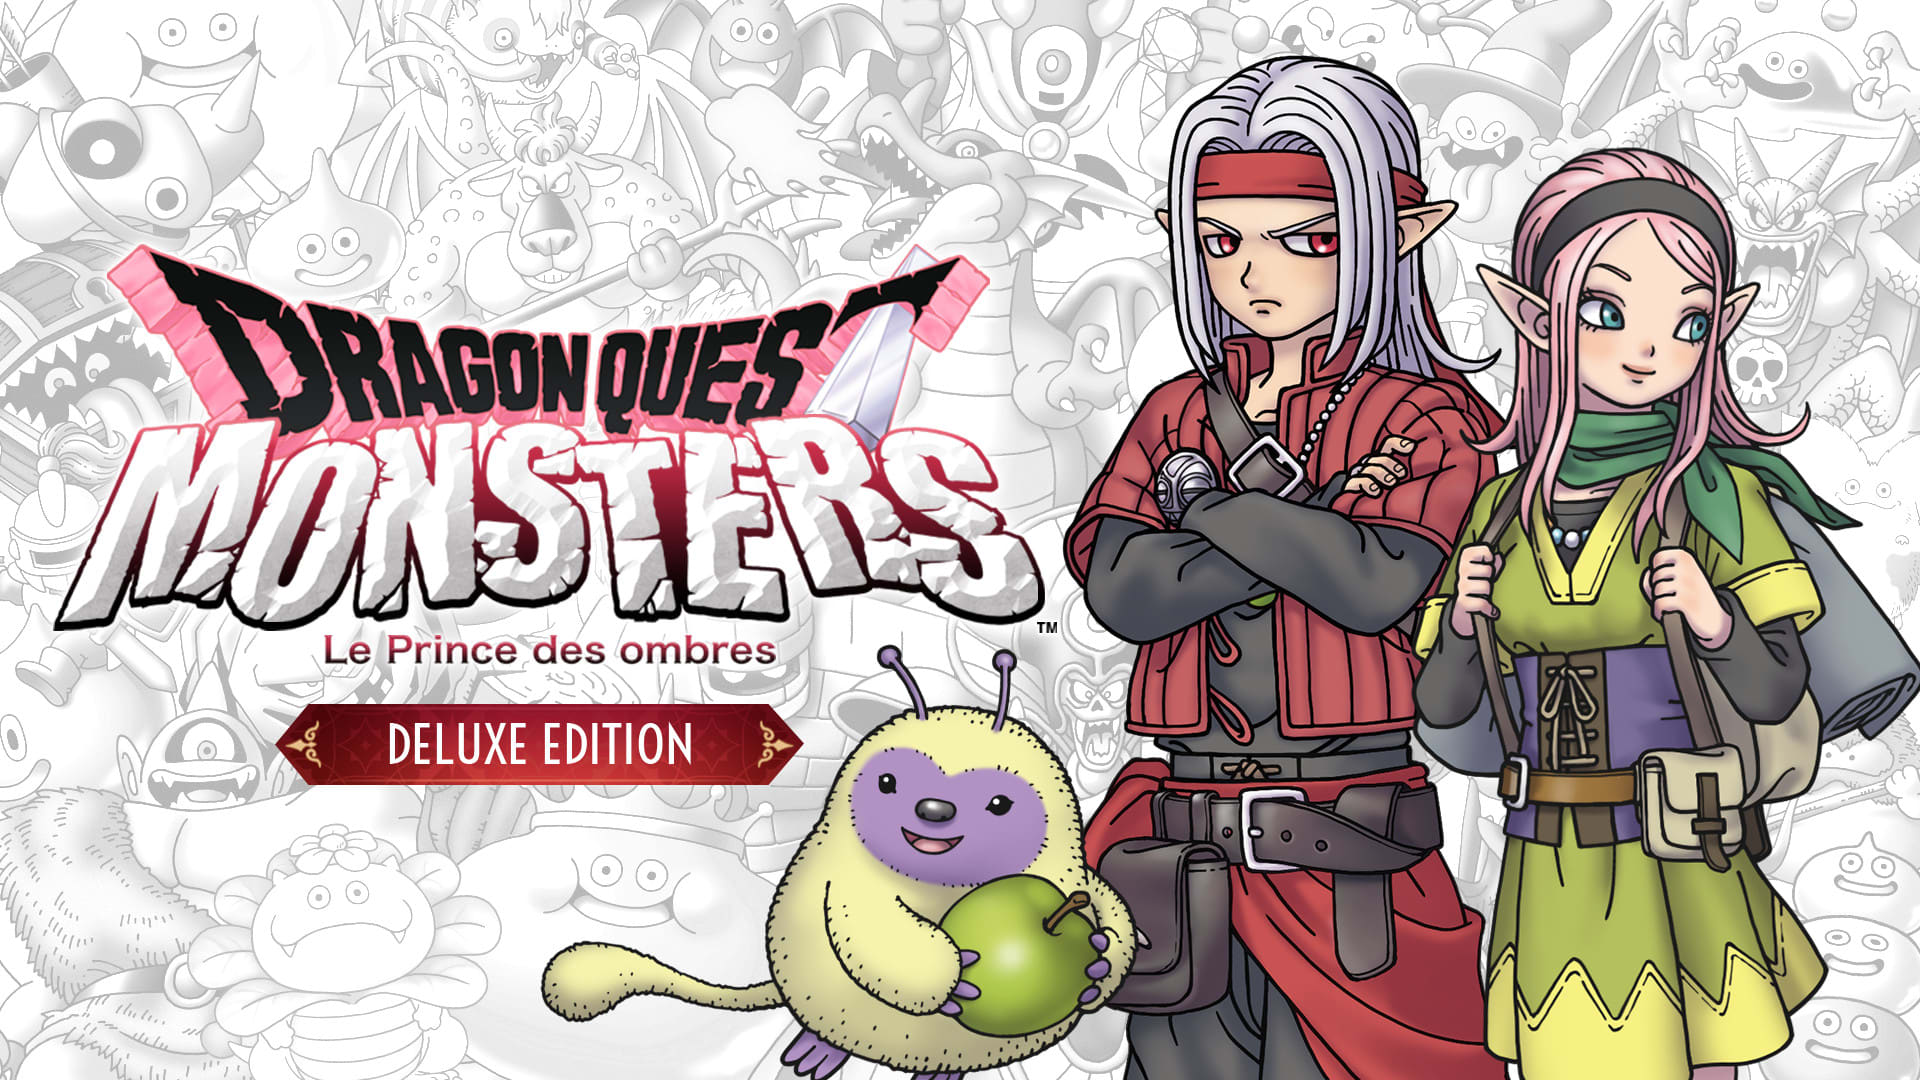 DRAGON QUEST MONSTERS : Le Prince des ombres Digital Deluxe Edition